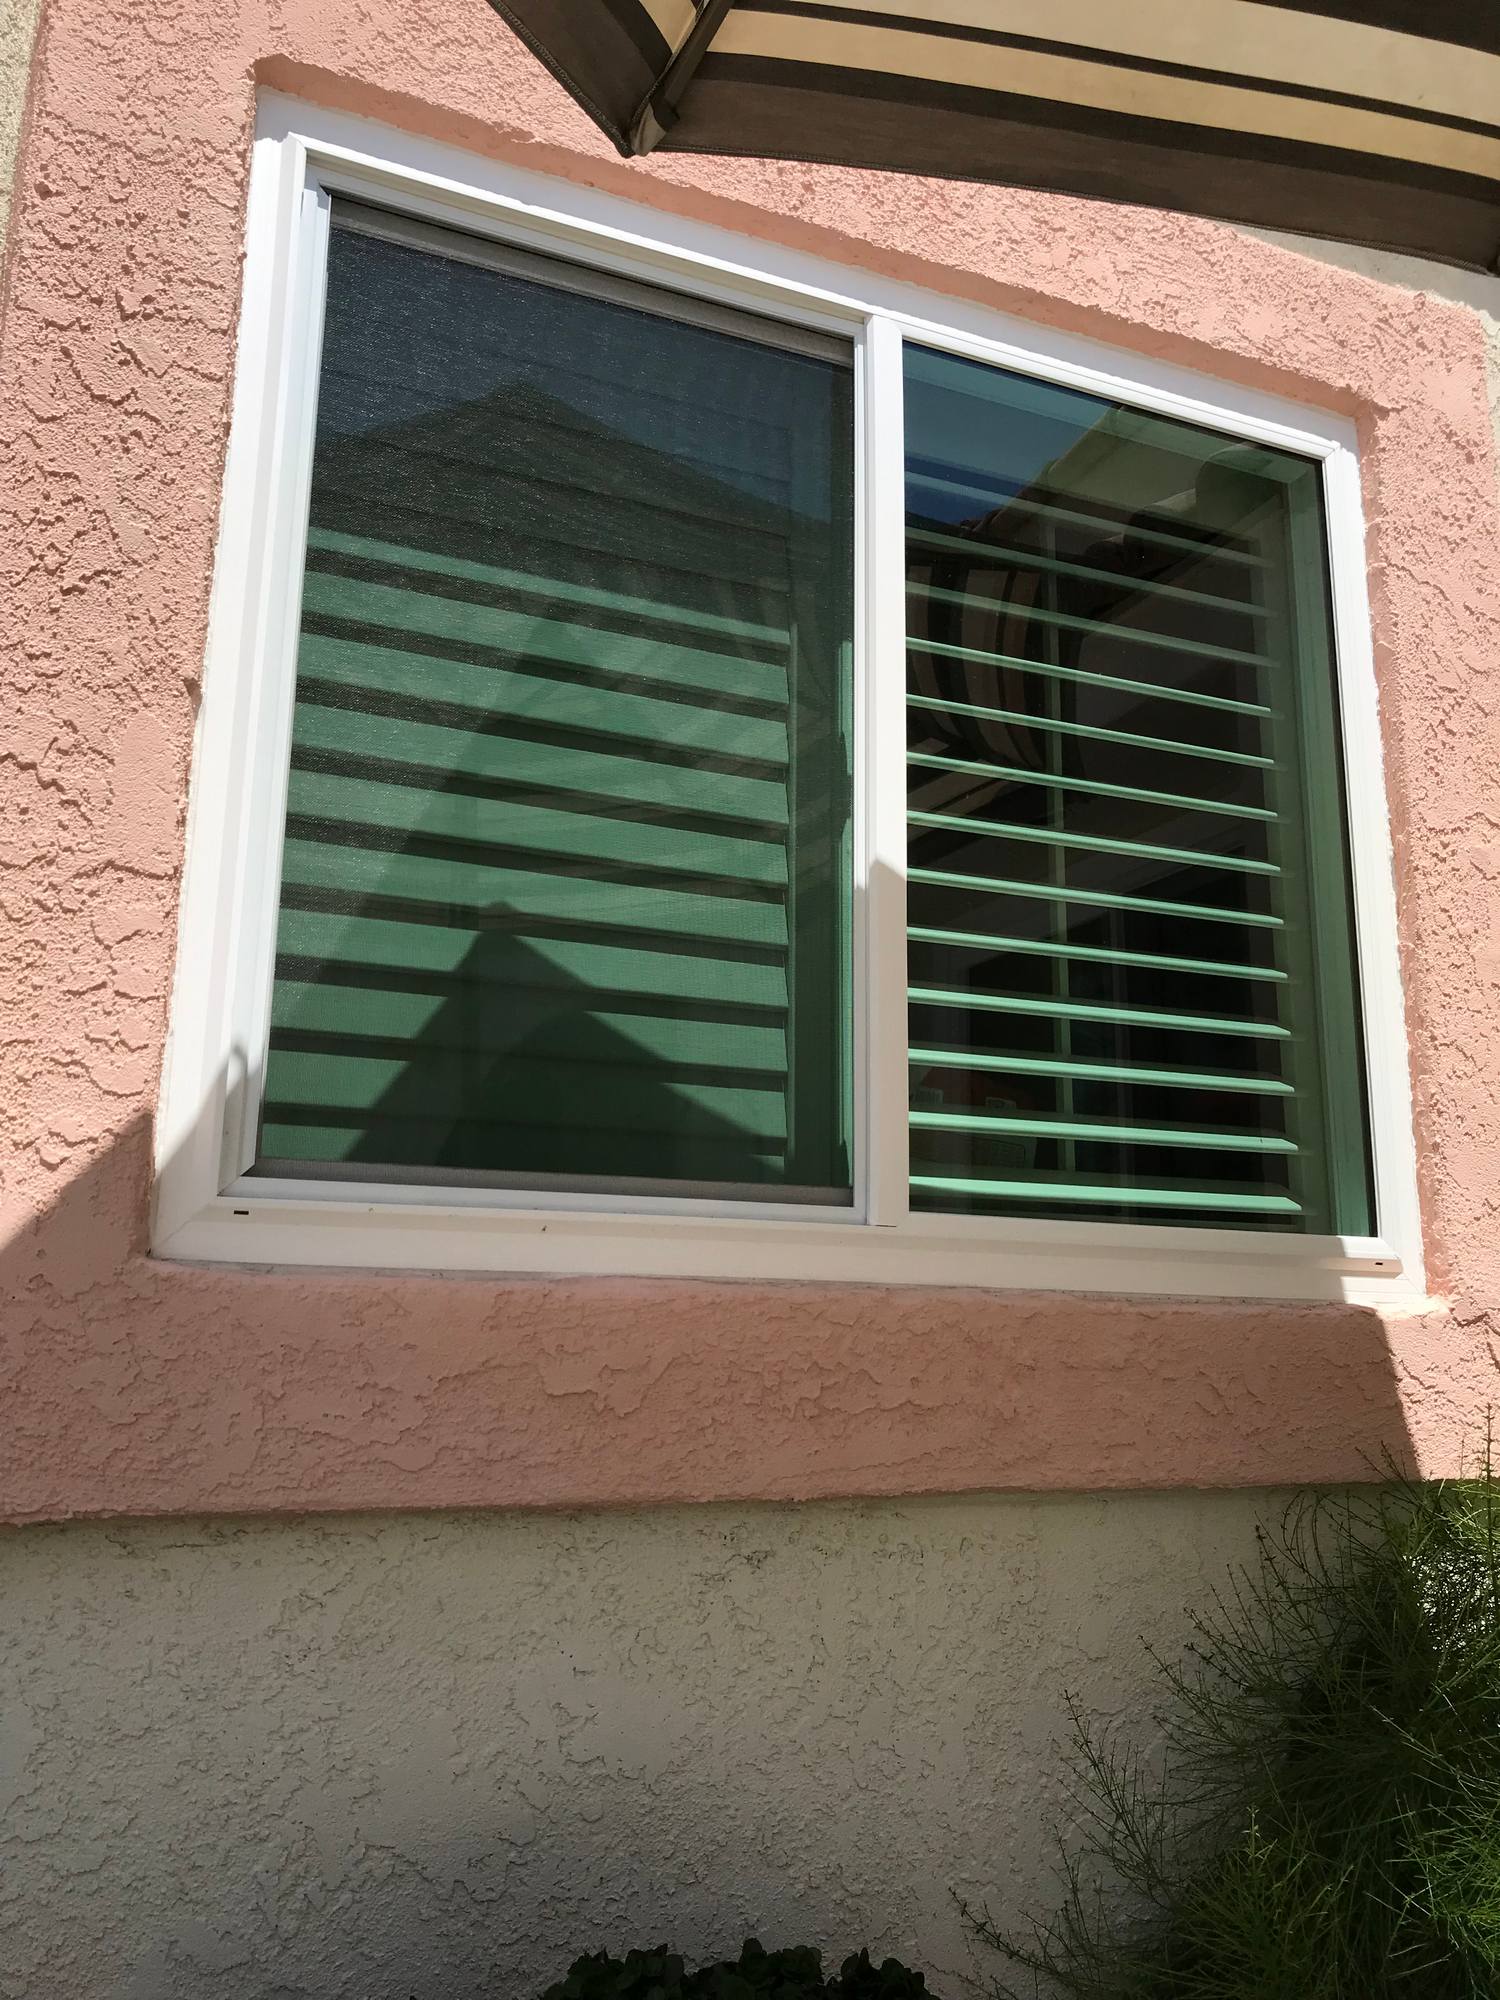 Panoramic Windows and Malibu Doors in Cathedral City, CA.